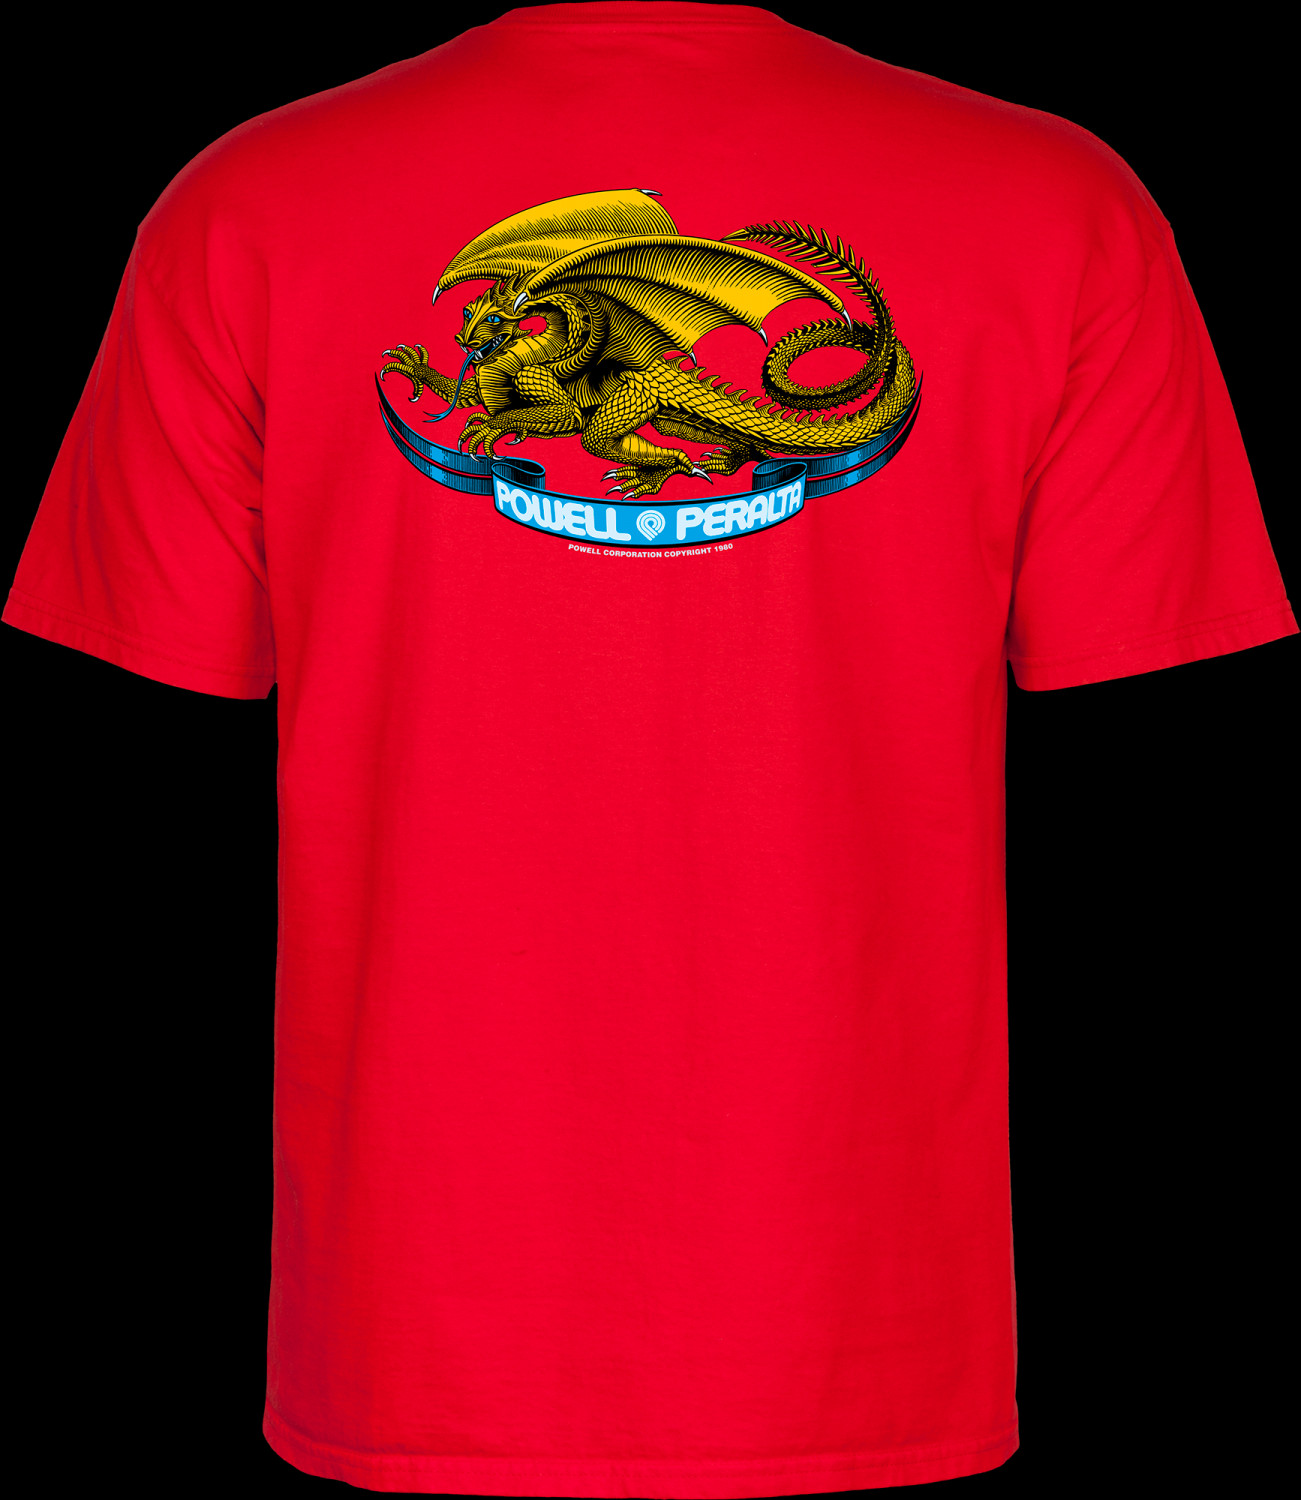 Powell Peralta Oval Dragon Youth T-shirt Red Photo #2 - Photo Gallery ...